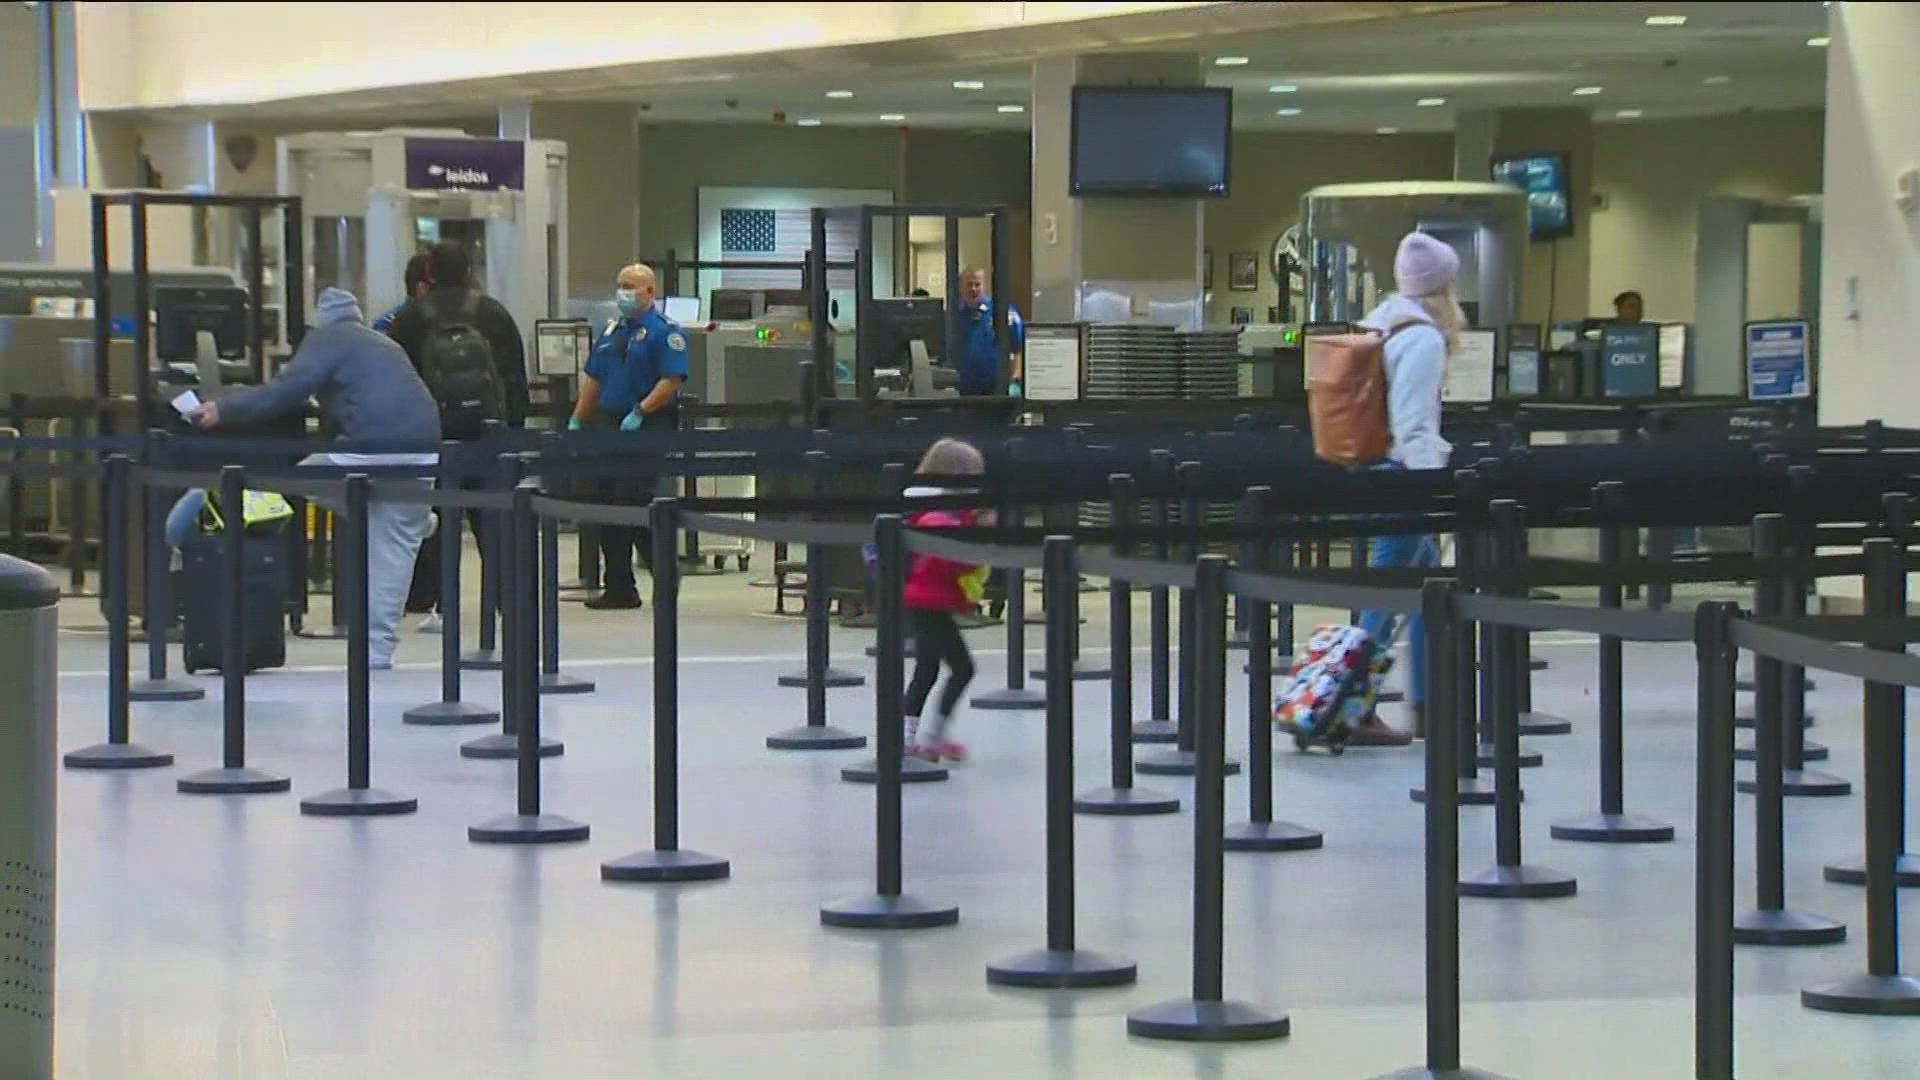 The airport has just added another security checkpoint lane and more than 300 economy parking spaces. Still, travelers are urged to arrive early.